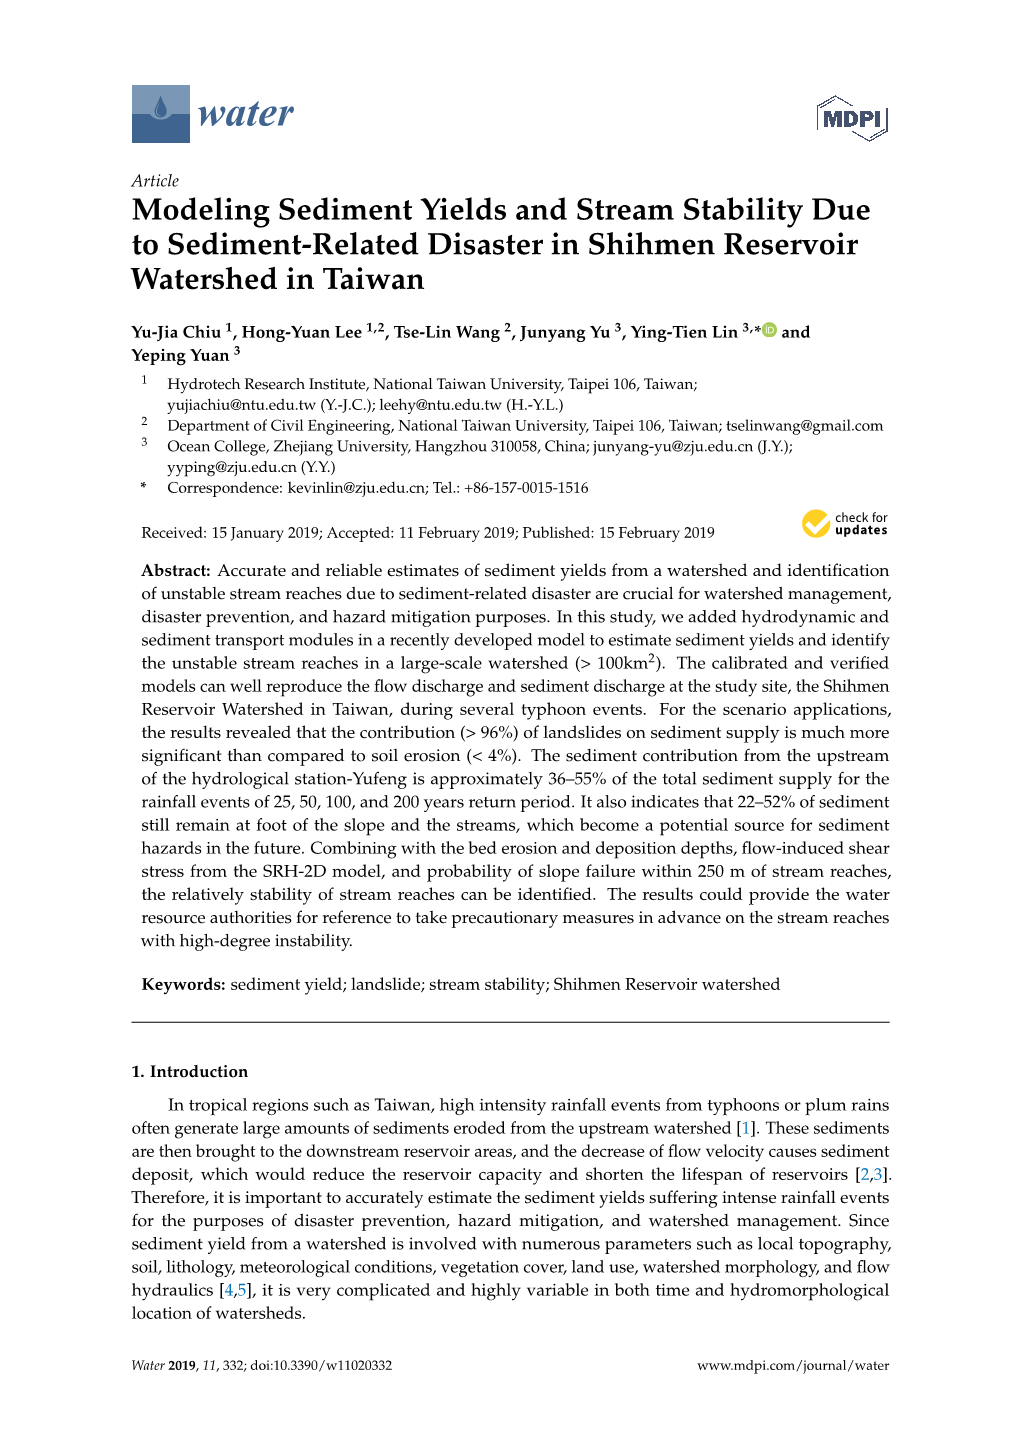 Modeling Sediment Yields and Stream Stability Due to Sediment-Related Disaster in Shihmen Reservoir Watershed in Taiwan